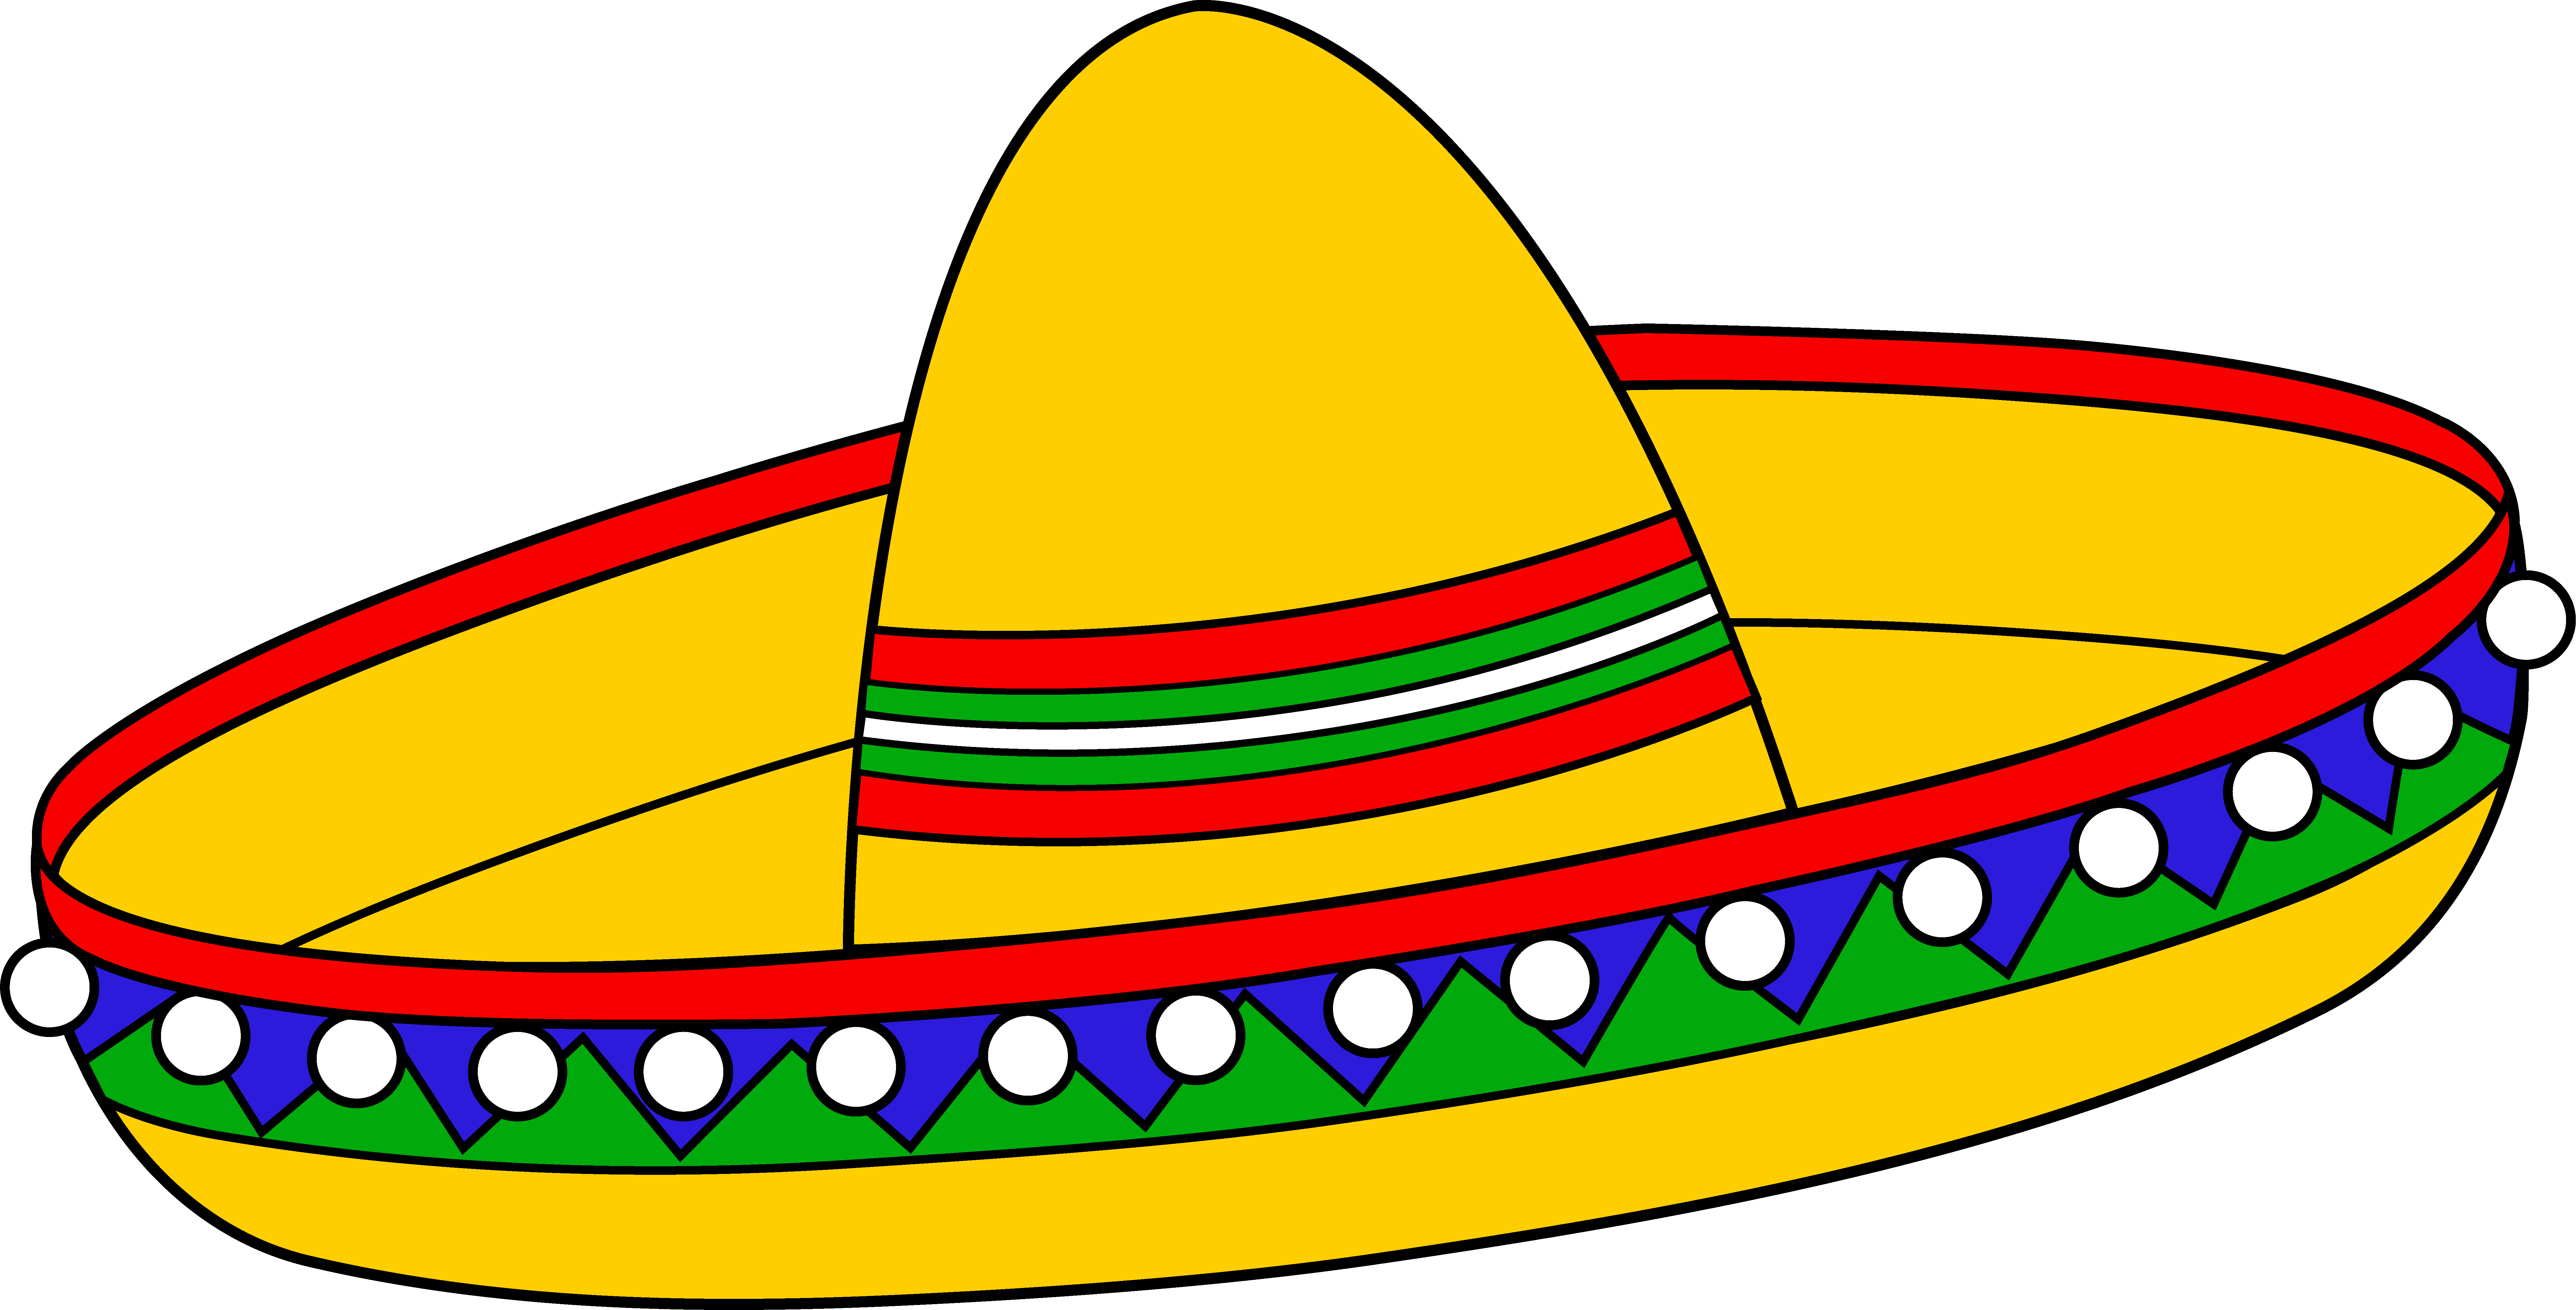 Vegetables clipart mexican. Colorful sombrero hat free